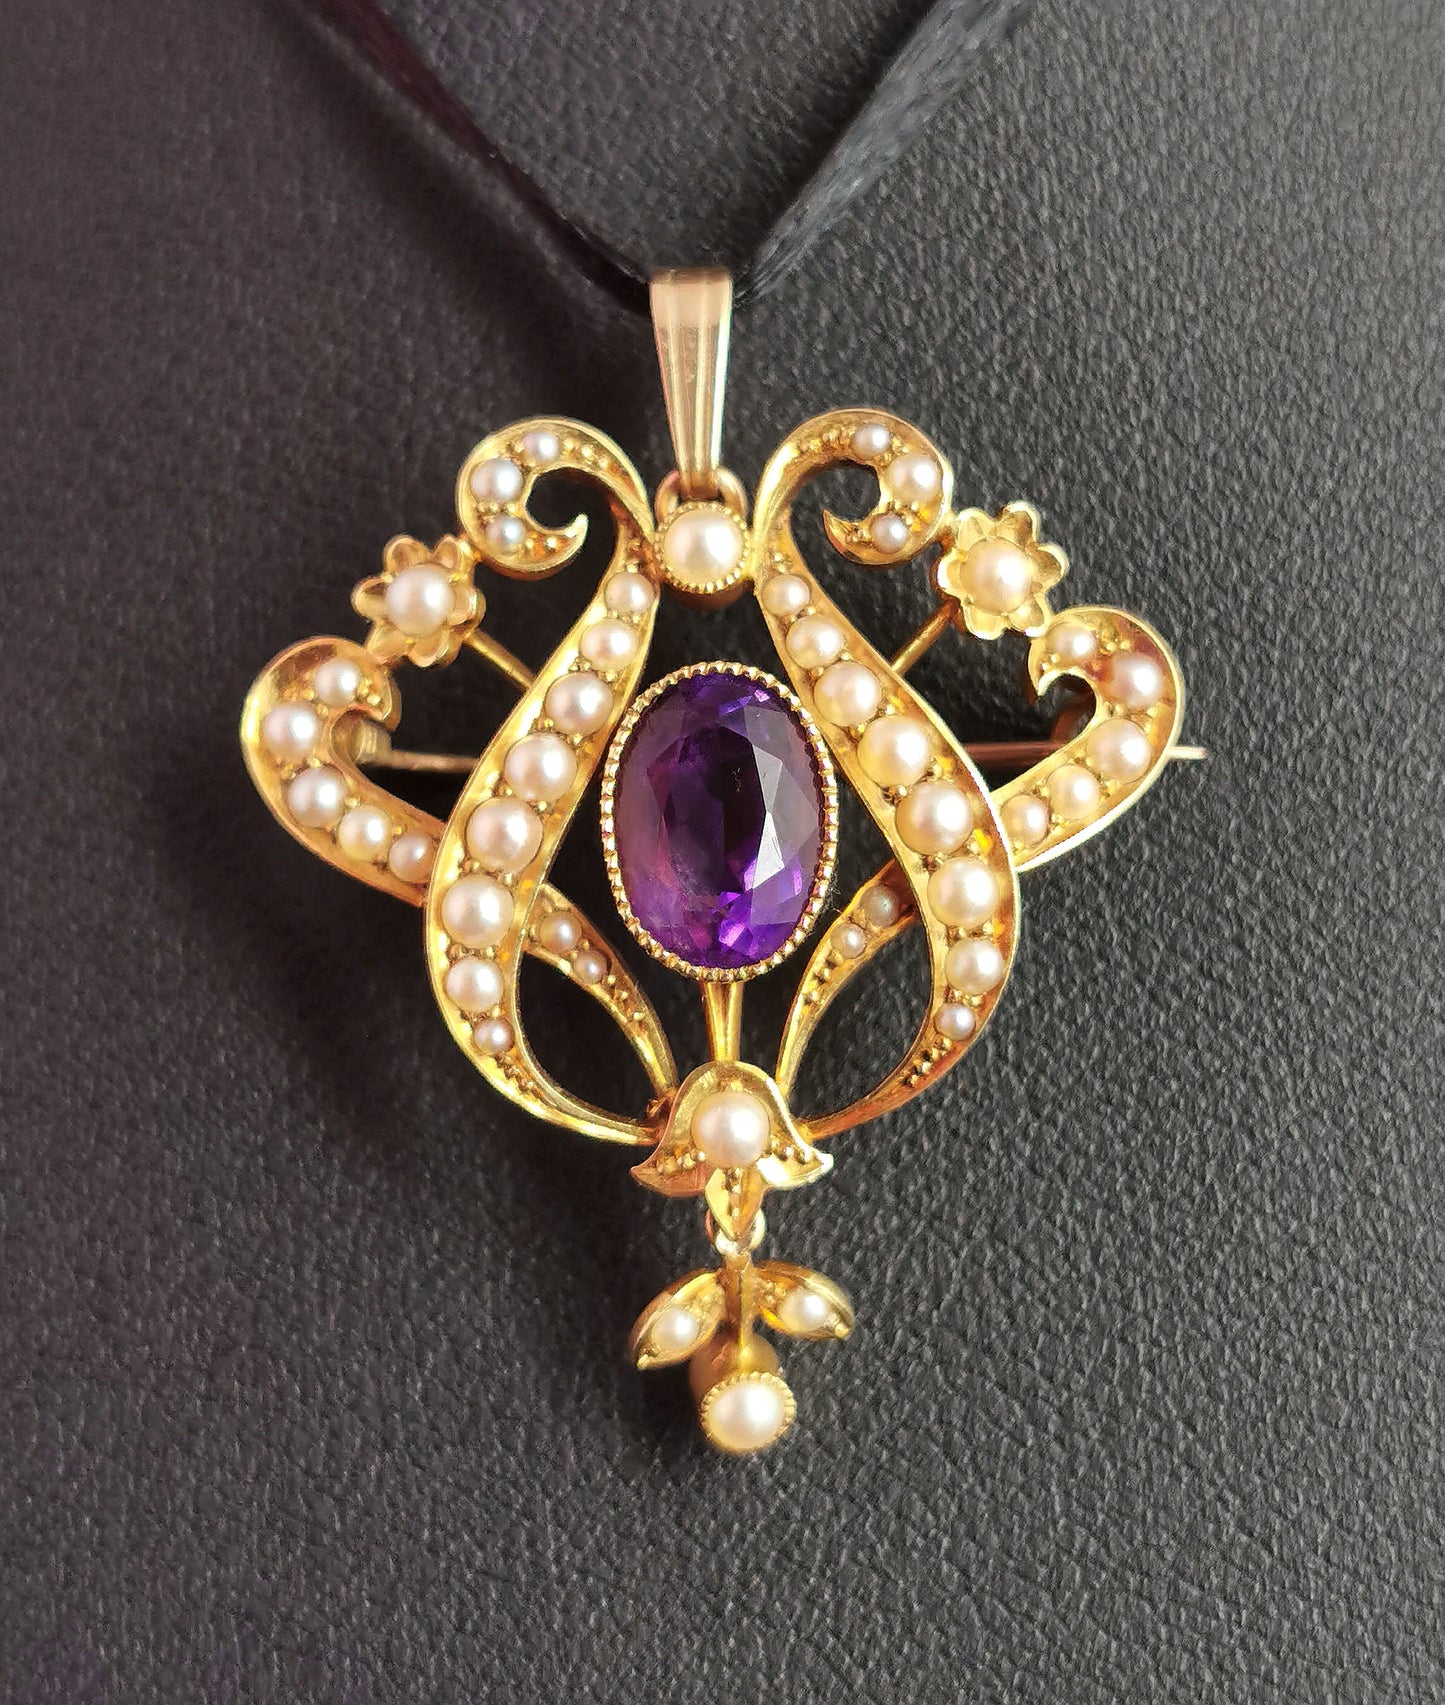 Antique Art Nouveau Amethyst and pearl pendant brooch, 15ct gold